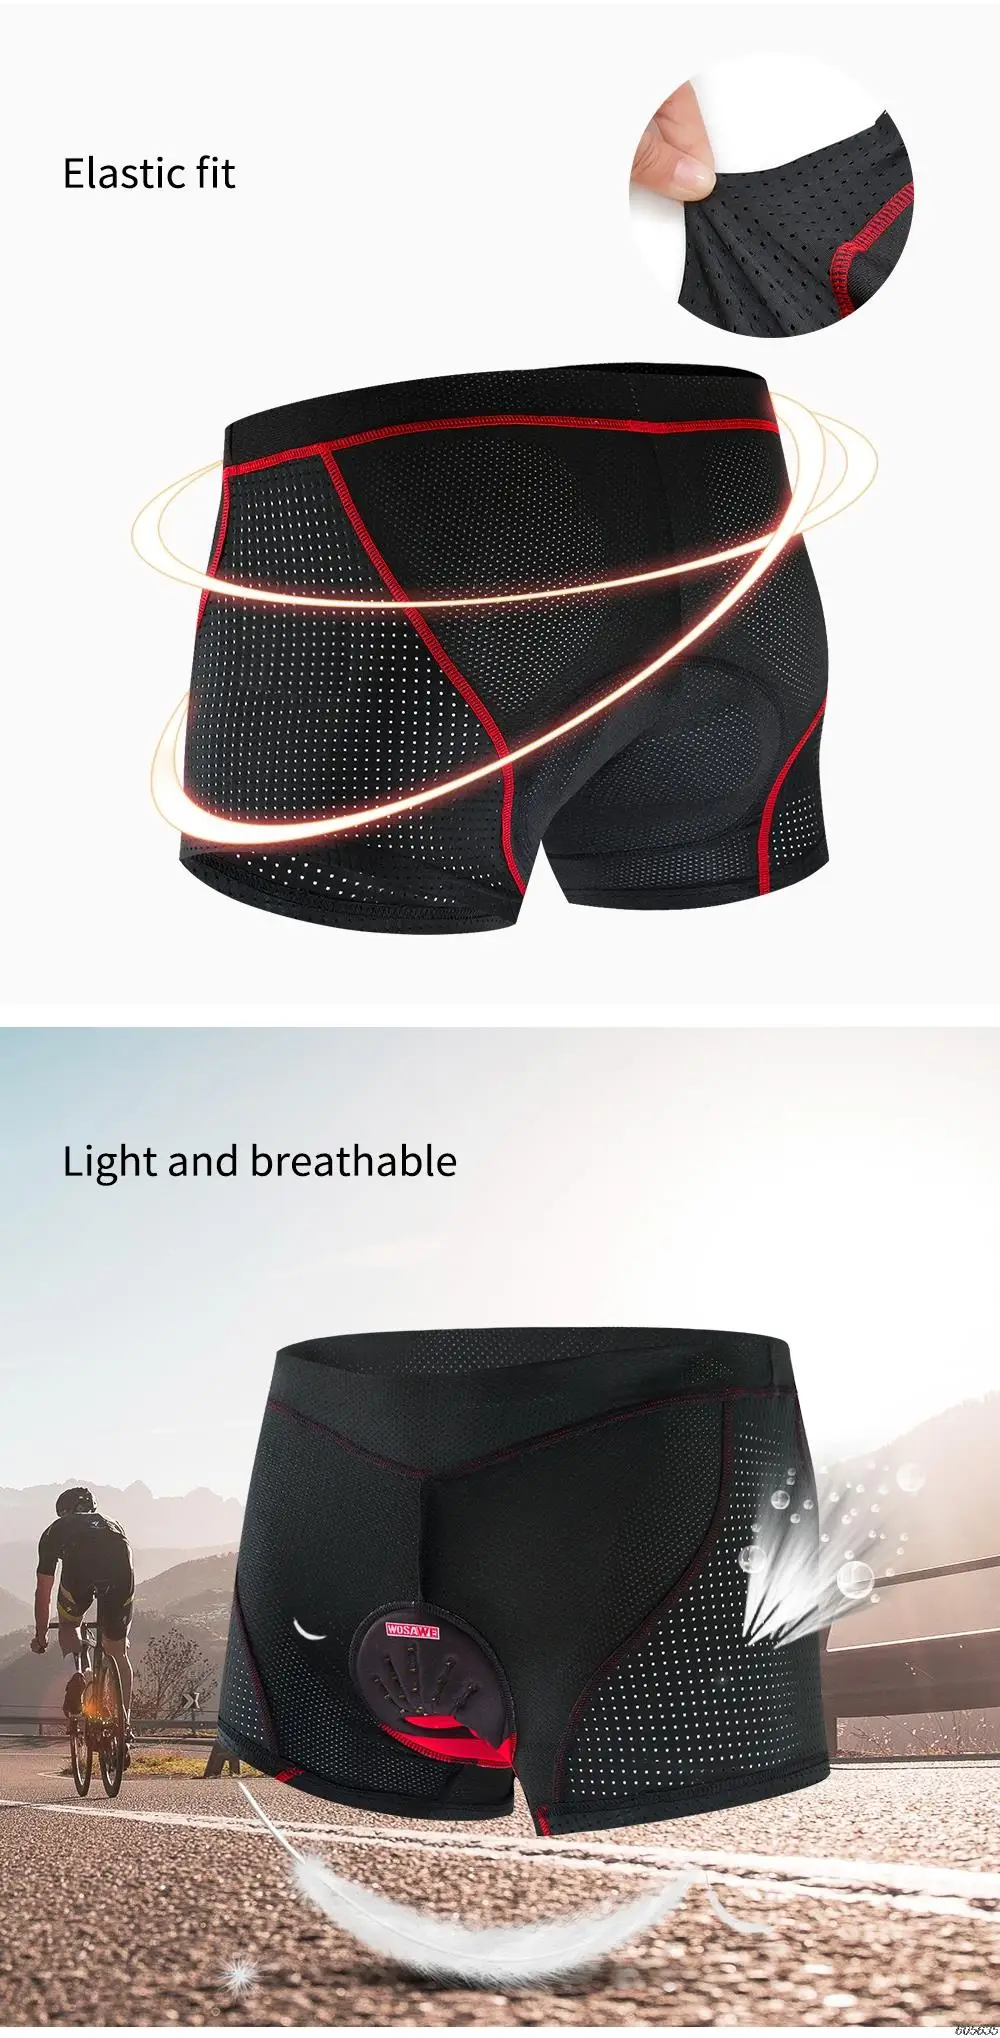 WOSAWE 2020 Upgrade Cycling Shorts Cycling Underwear Pro 5D Gel Pad Shockproof Cycling Underpant Bicycle Shorts Bike Underwear